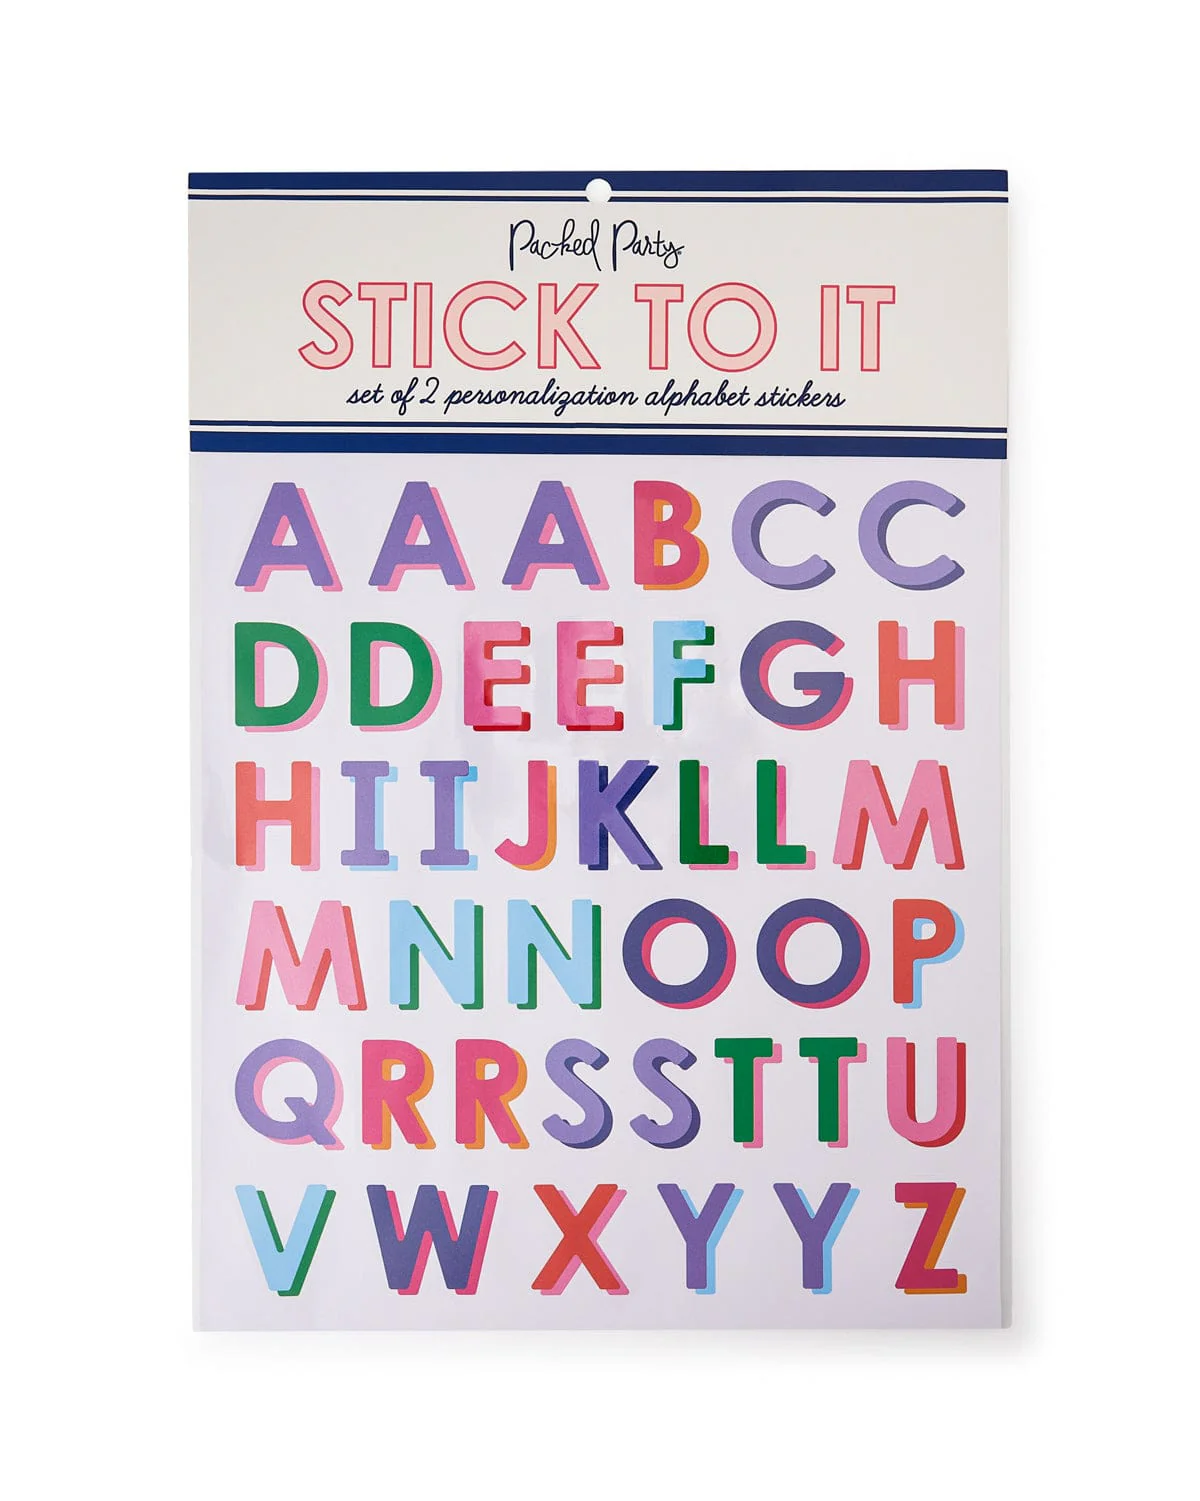 Stick To It Vinyl Alphabet Stickers | Packed Party | Iris Gifts & Décor